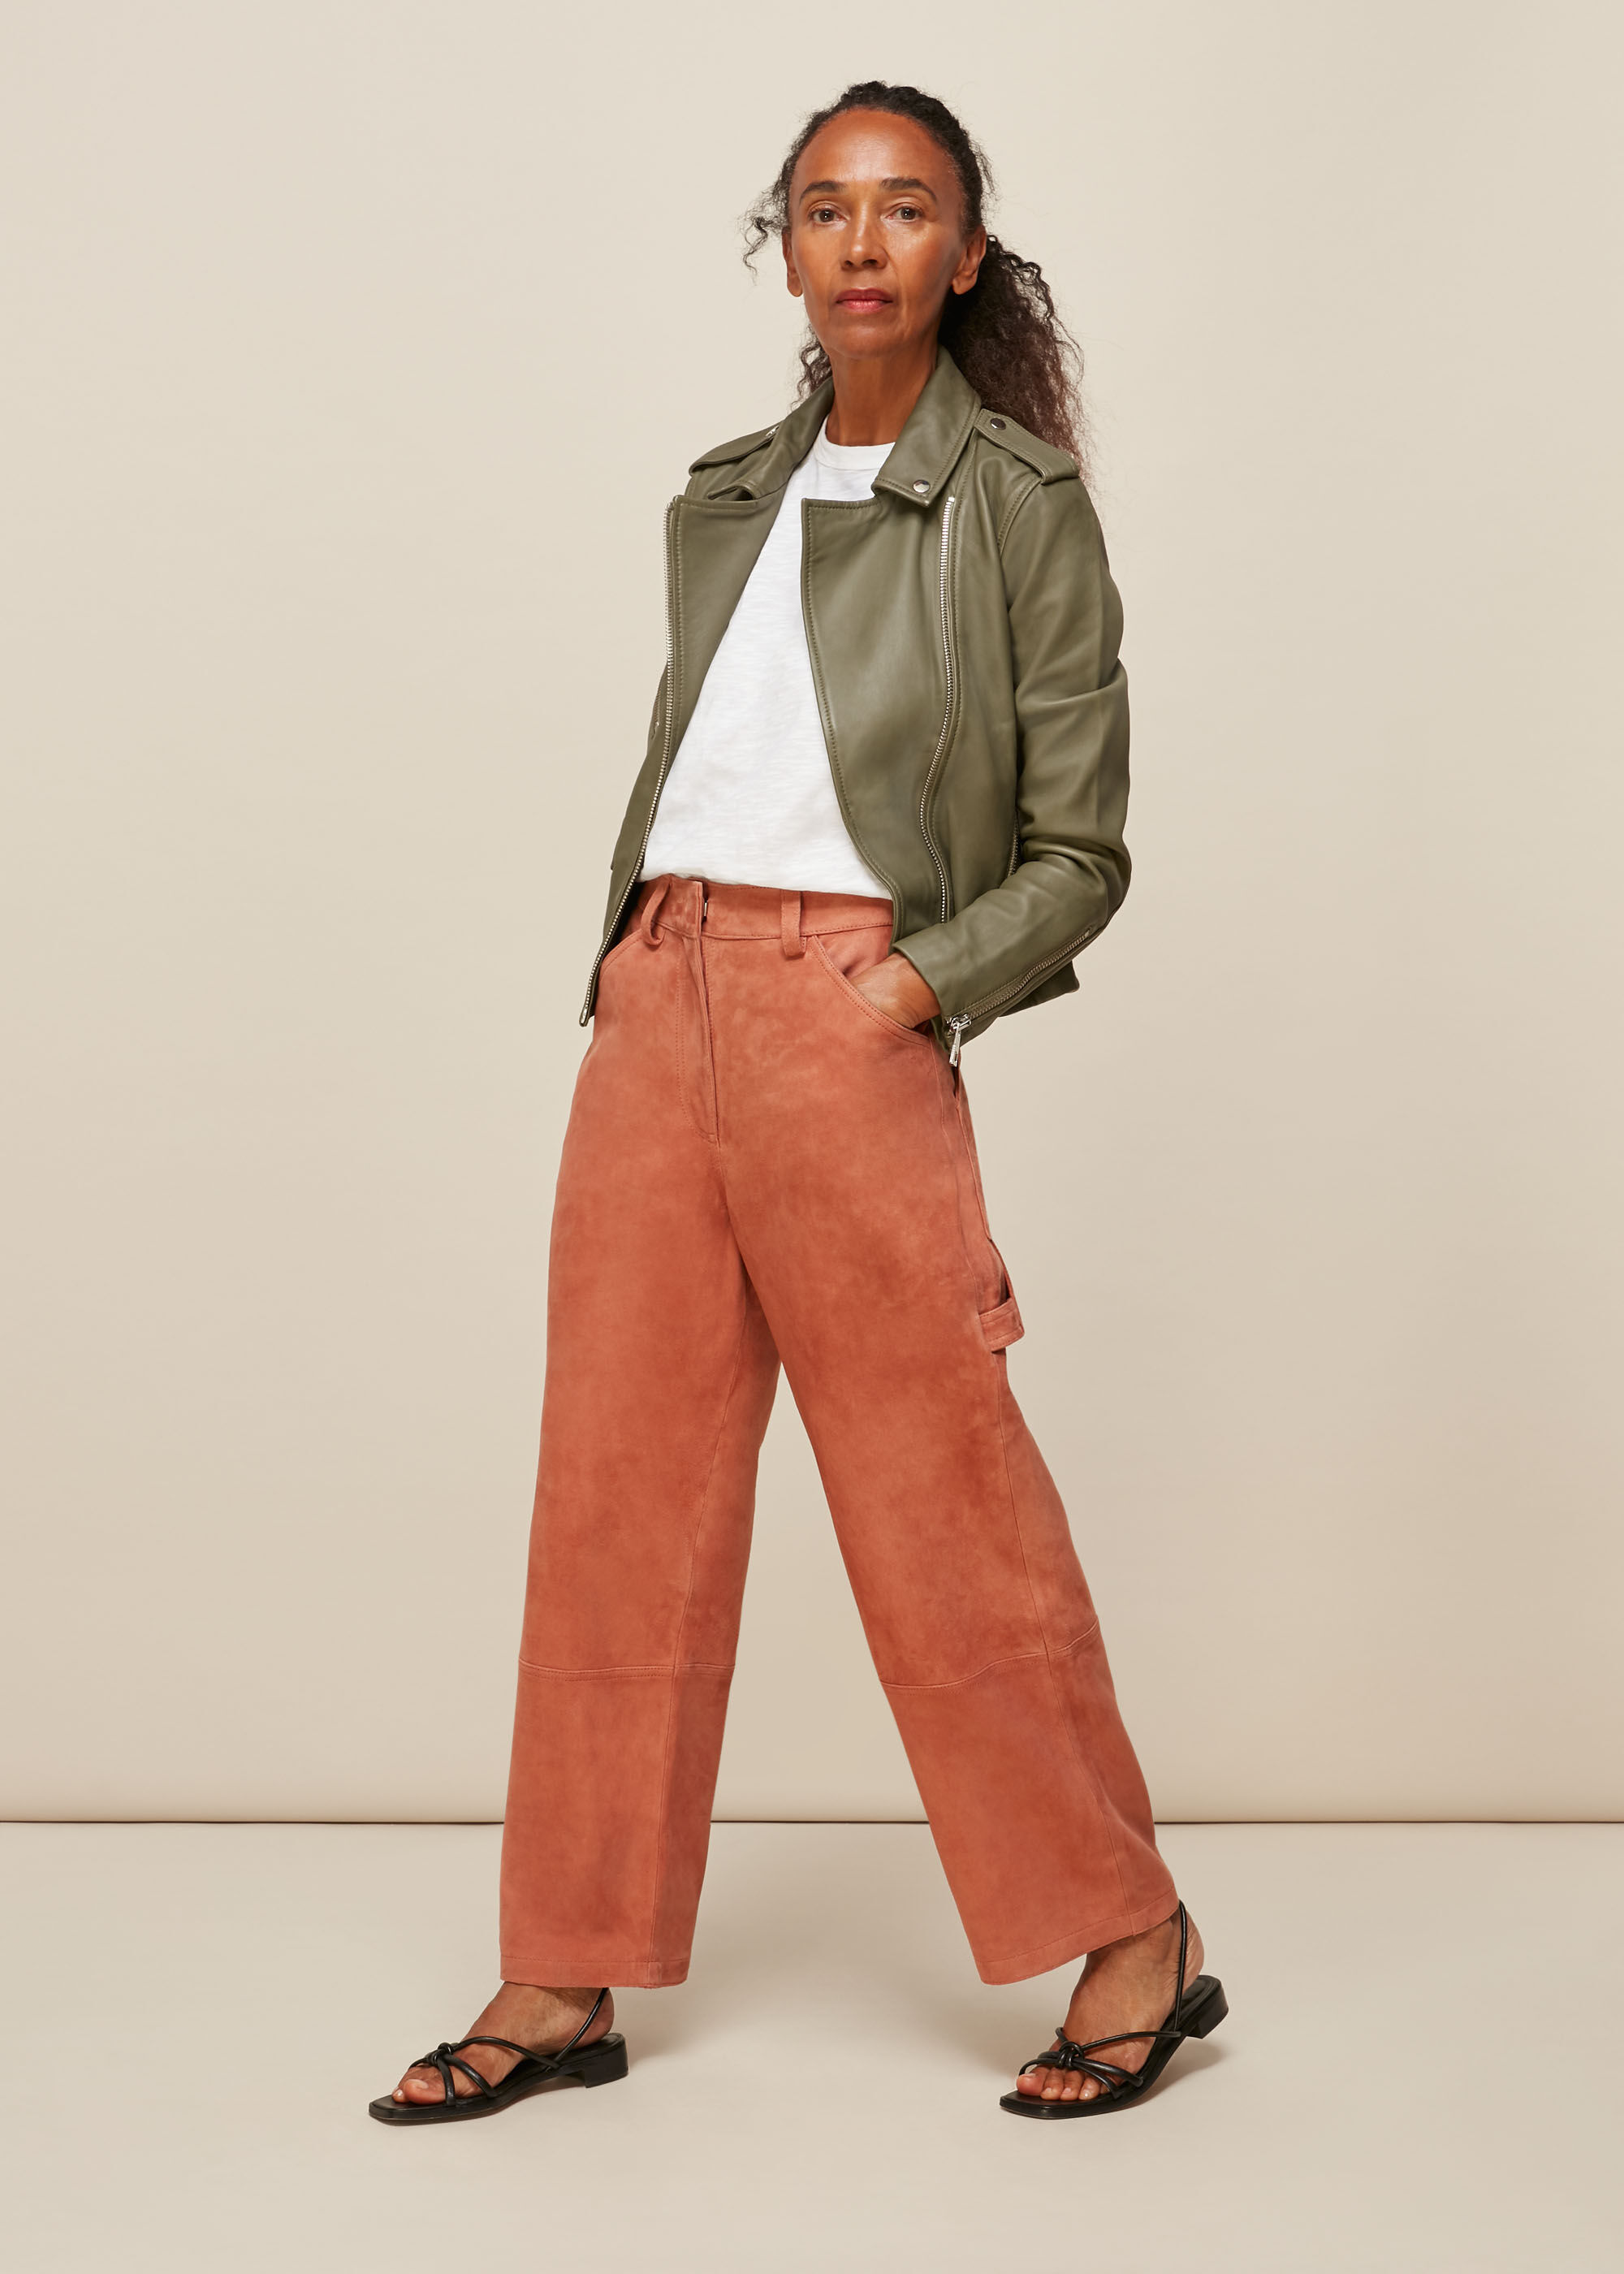 What to wear with suede pants (Complete Guide for Women)